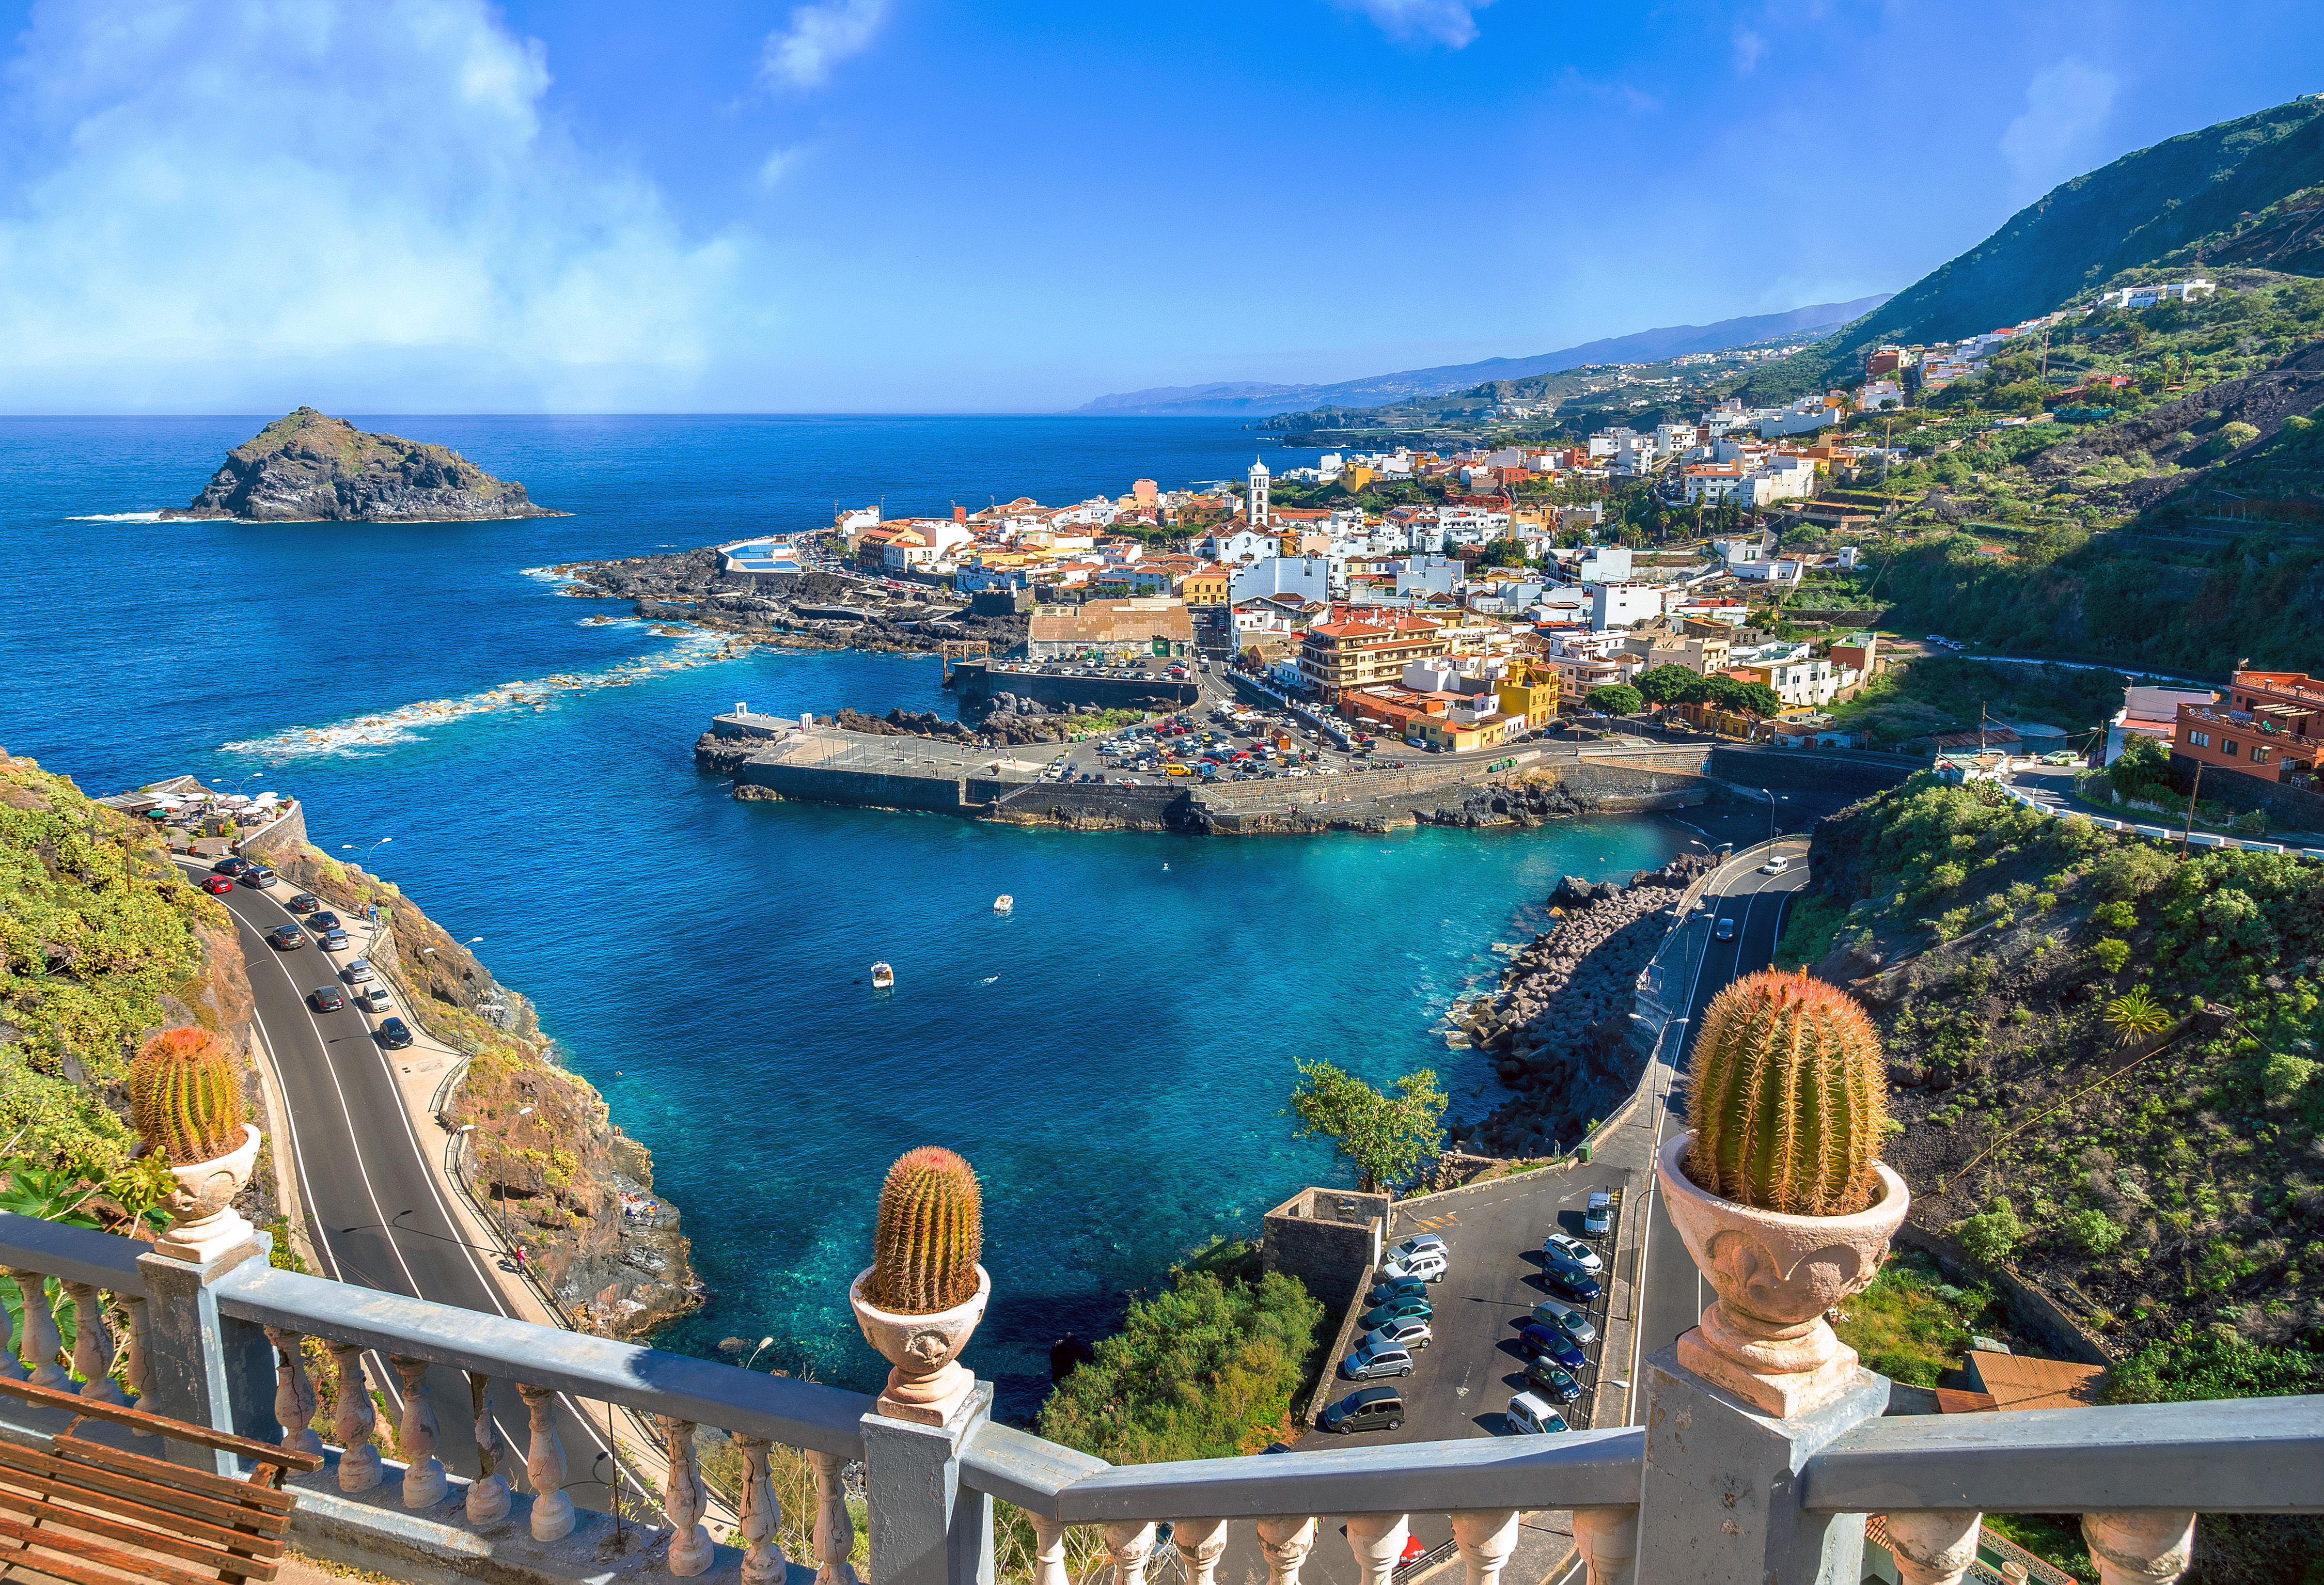 Landscape with Garachico town of Tenerife, Canary Islands, Spain